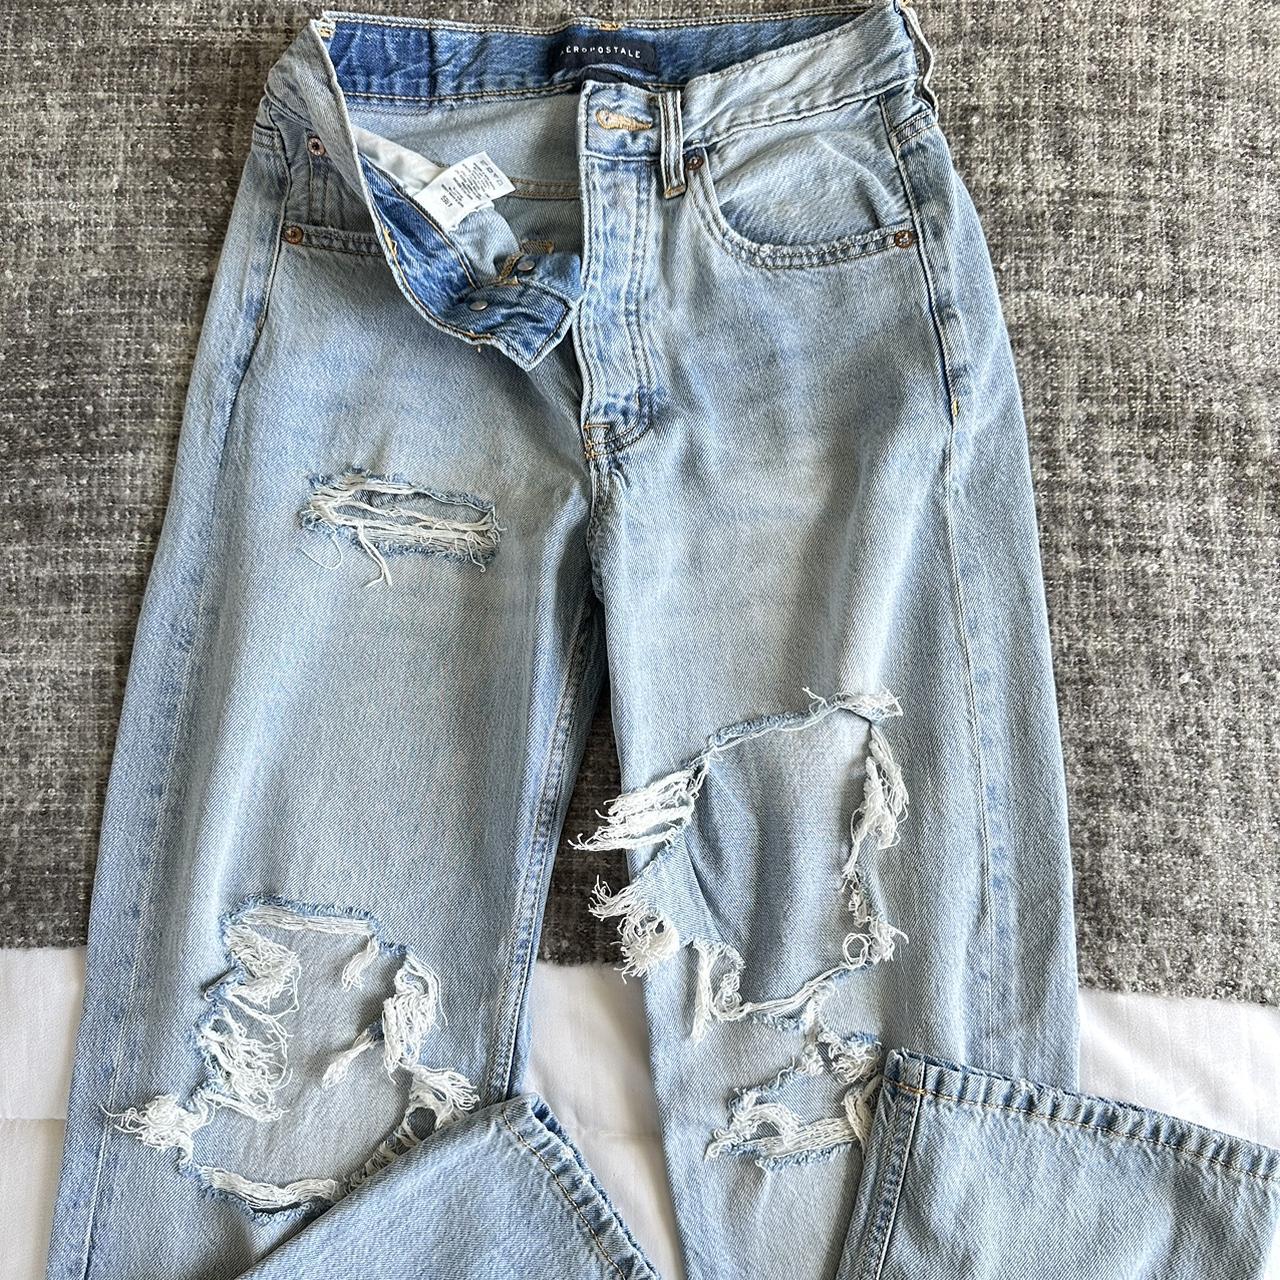 Aeropostale jeans -Brand new in good condition - Depop